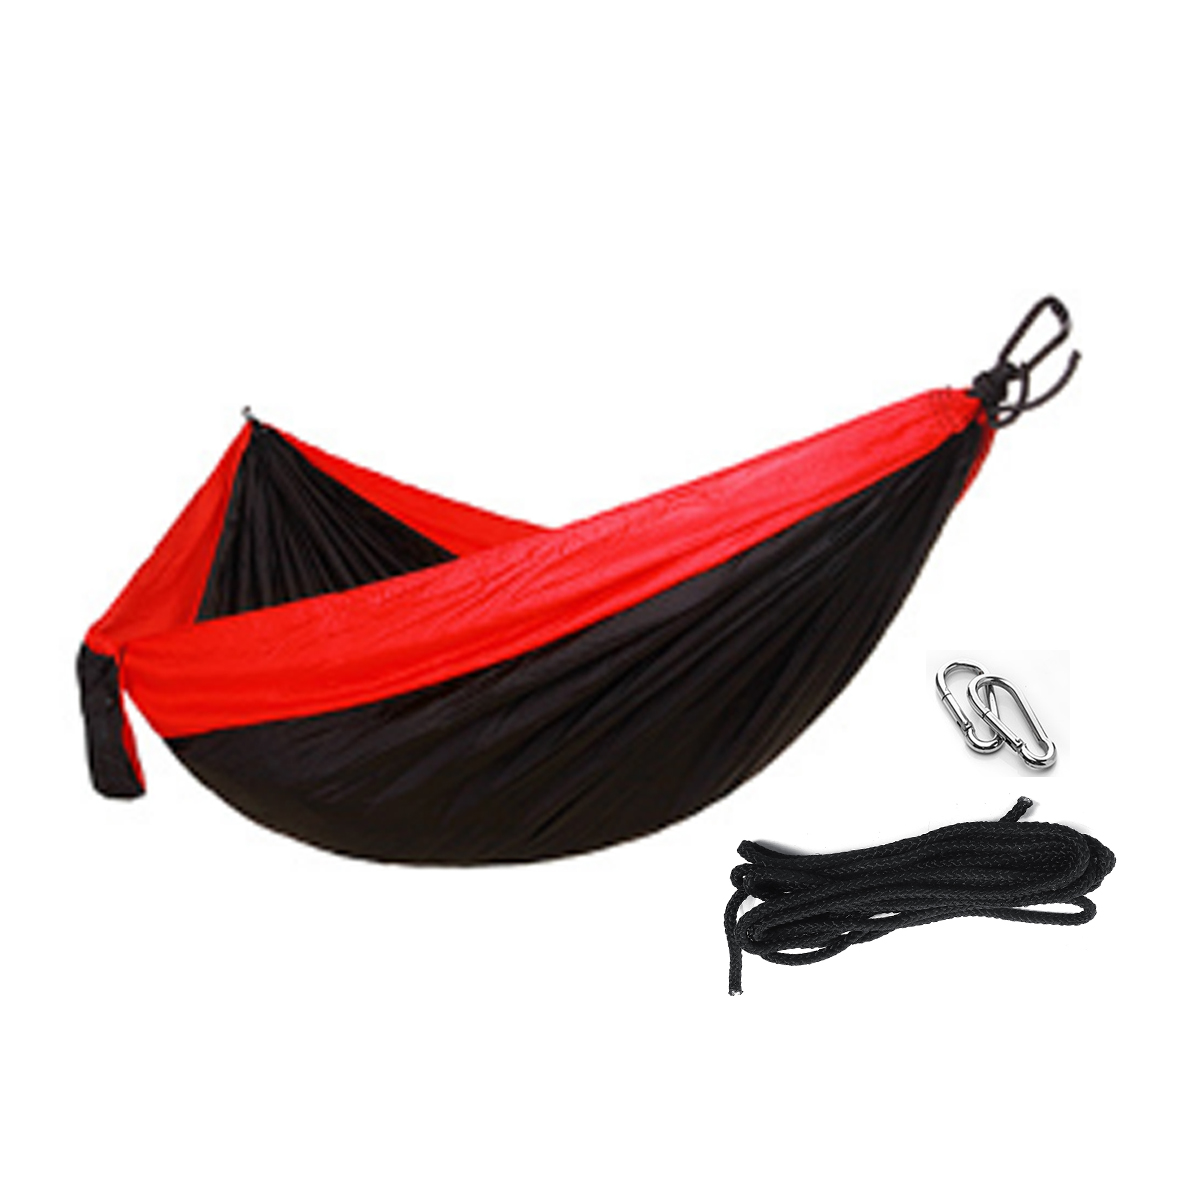 Outdoor-Travel-Double-Person-Hanging-Hammock-Max-Load-200KG-Portable-Camping-Hammock-Bed-1514882-5